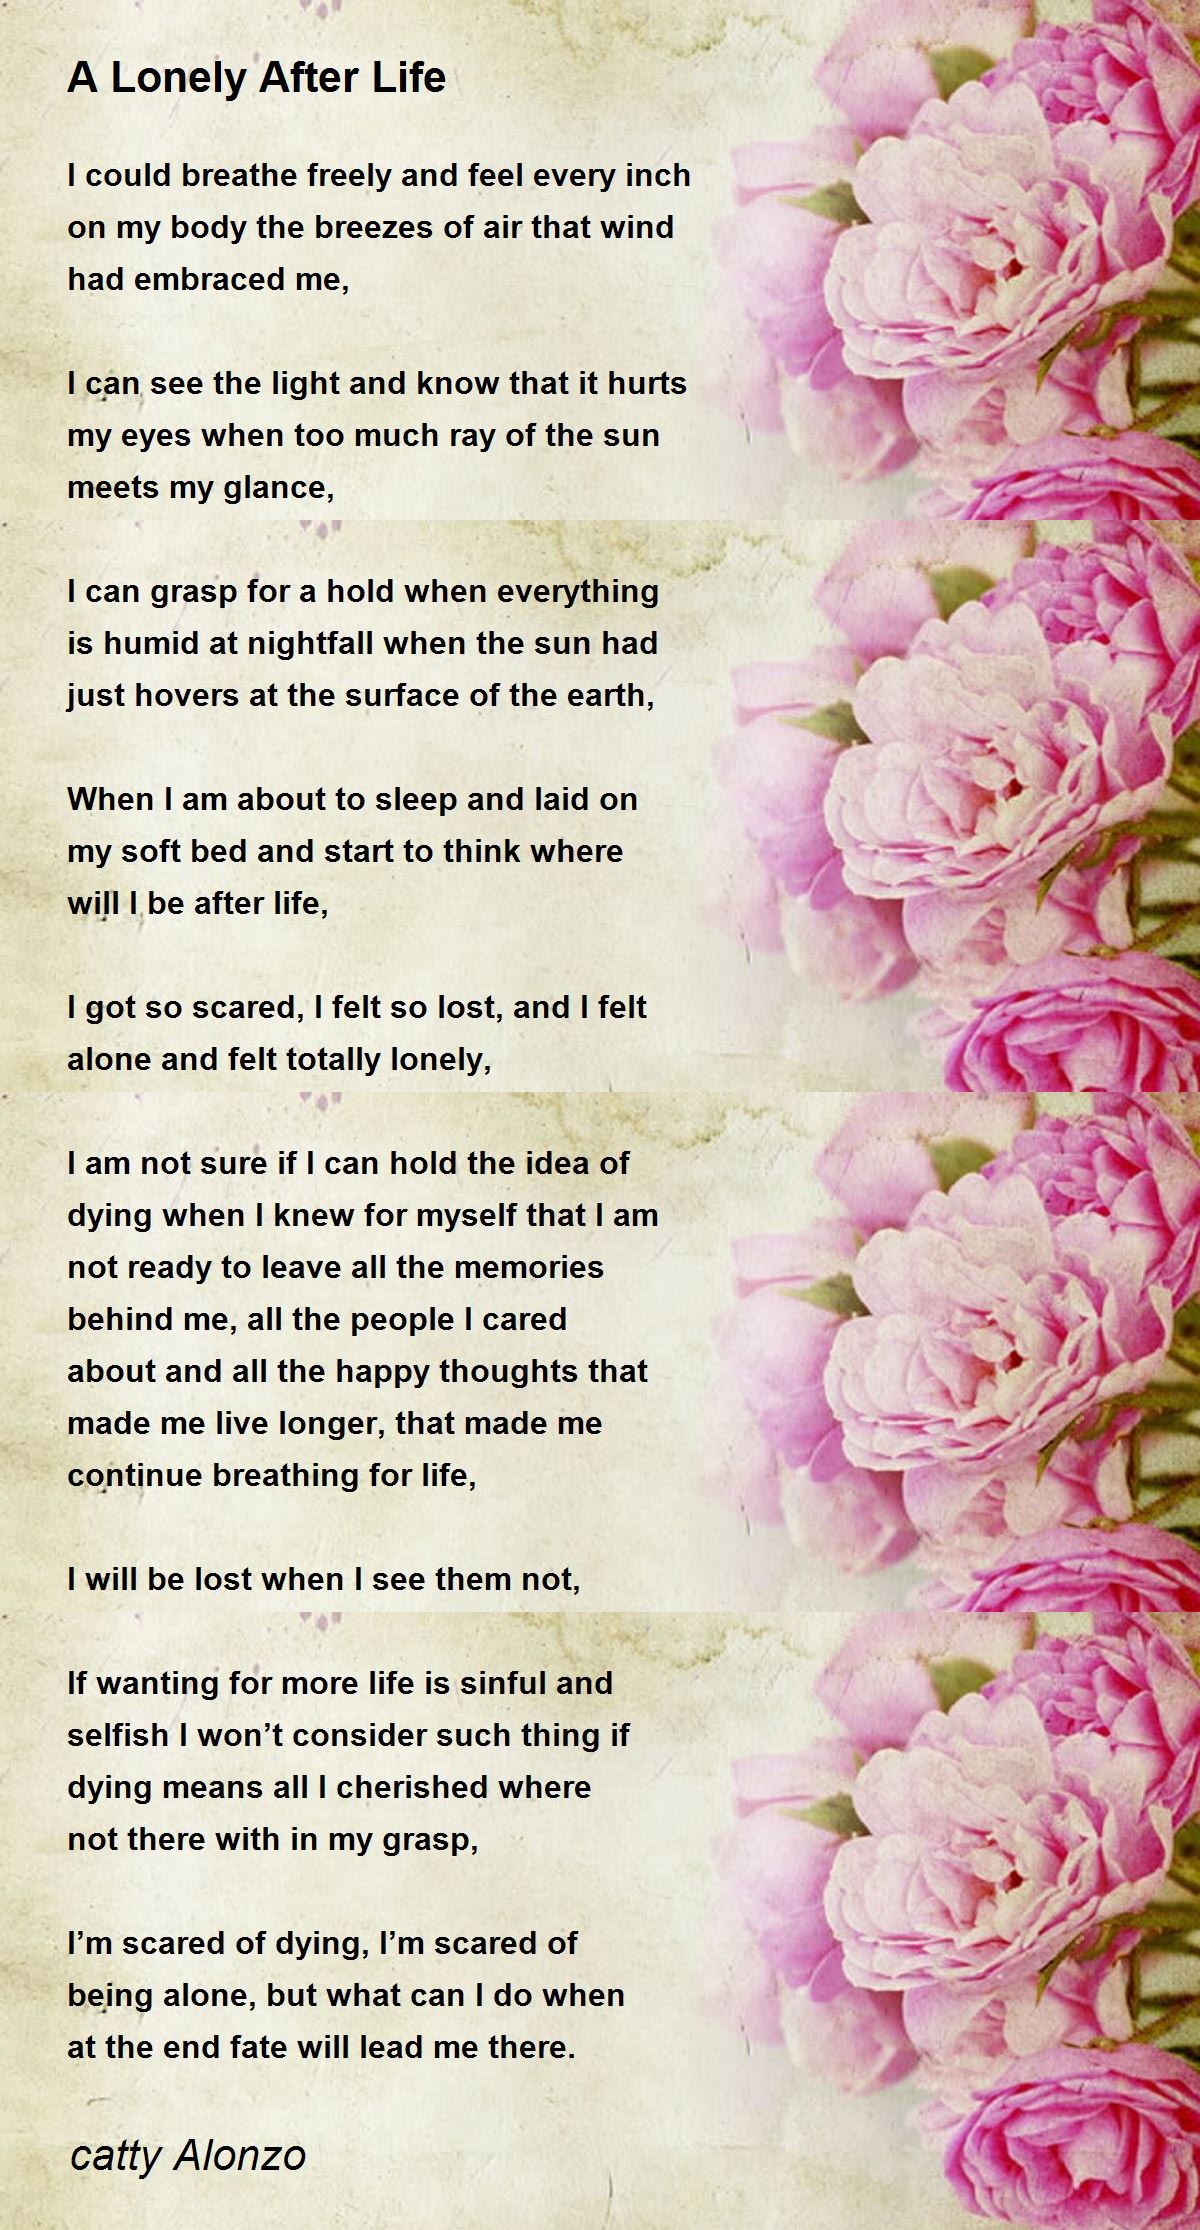 A Lonely After Life - A Lonely After Life Poem by catty Alonzo